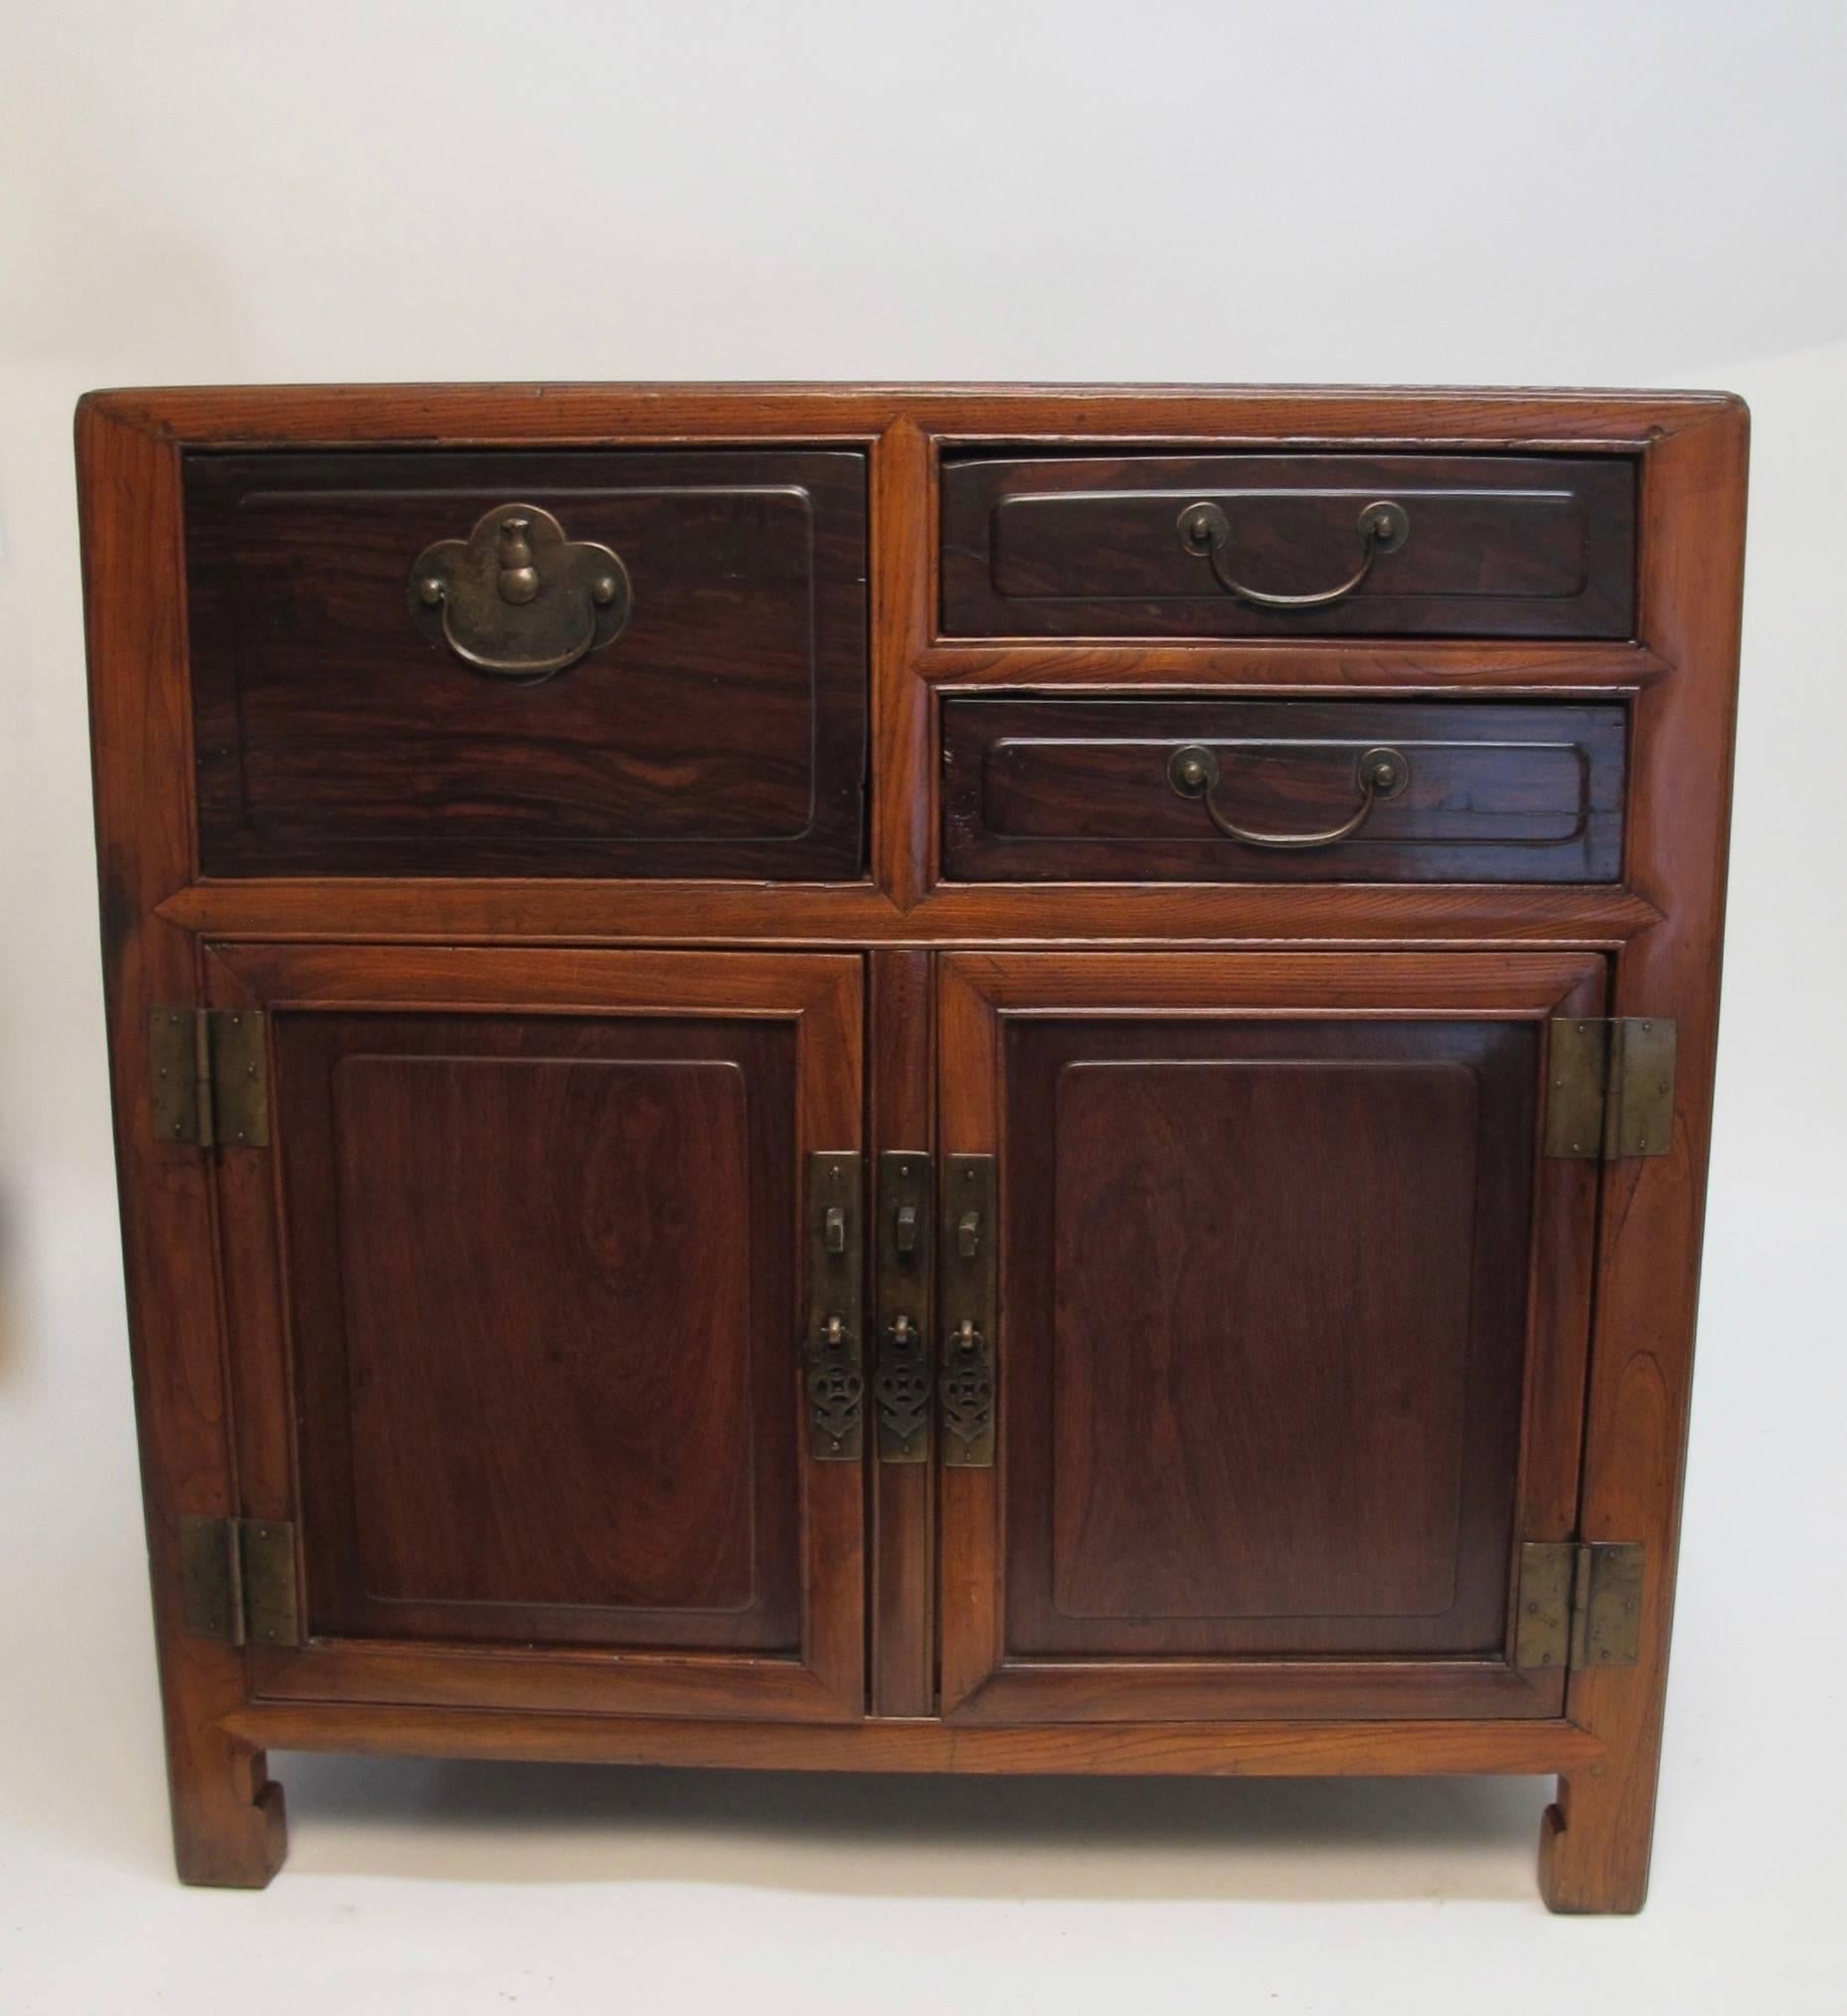 An usual elmwood and rosewood Chinese cabinet. Having an inset rosewood panel on the top, doors and drawers of rosewood, and the body of the chest is Chinese elmwood. Original brass pulls and hardware. Interesting molding detail around the entire